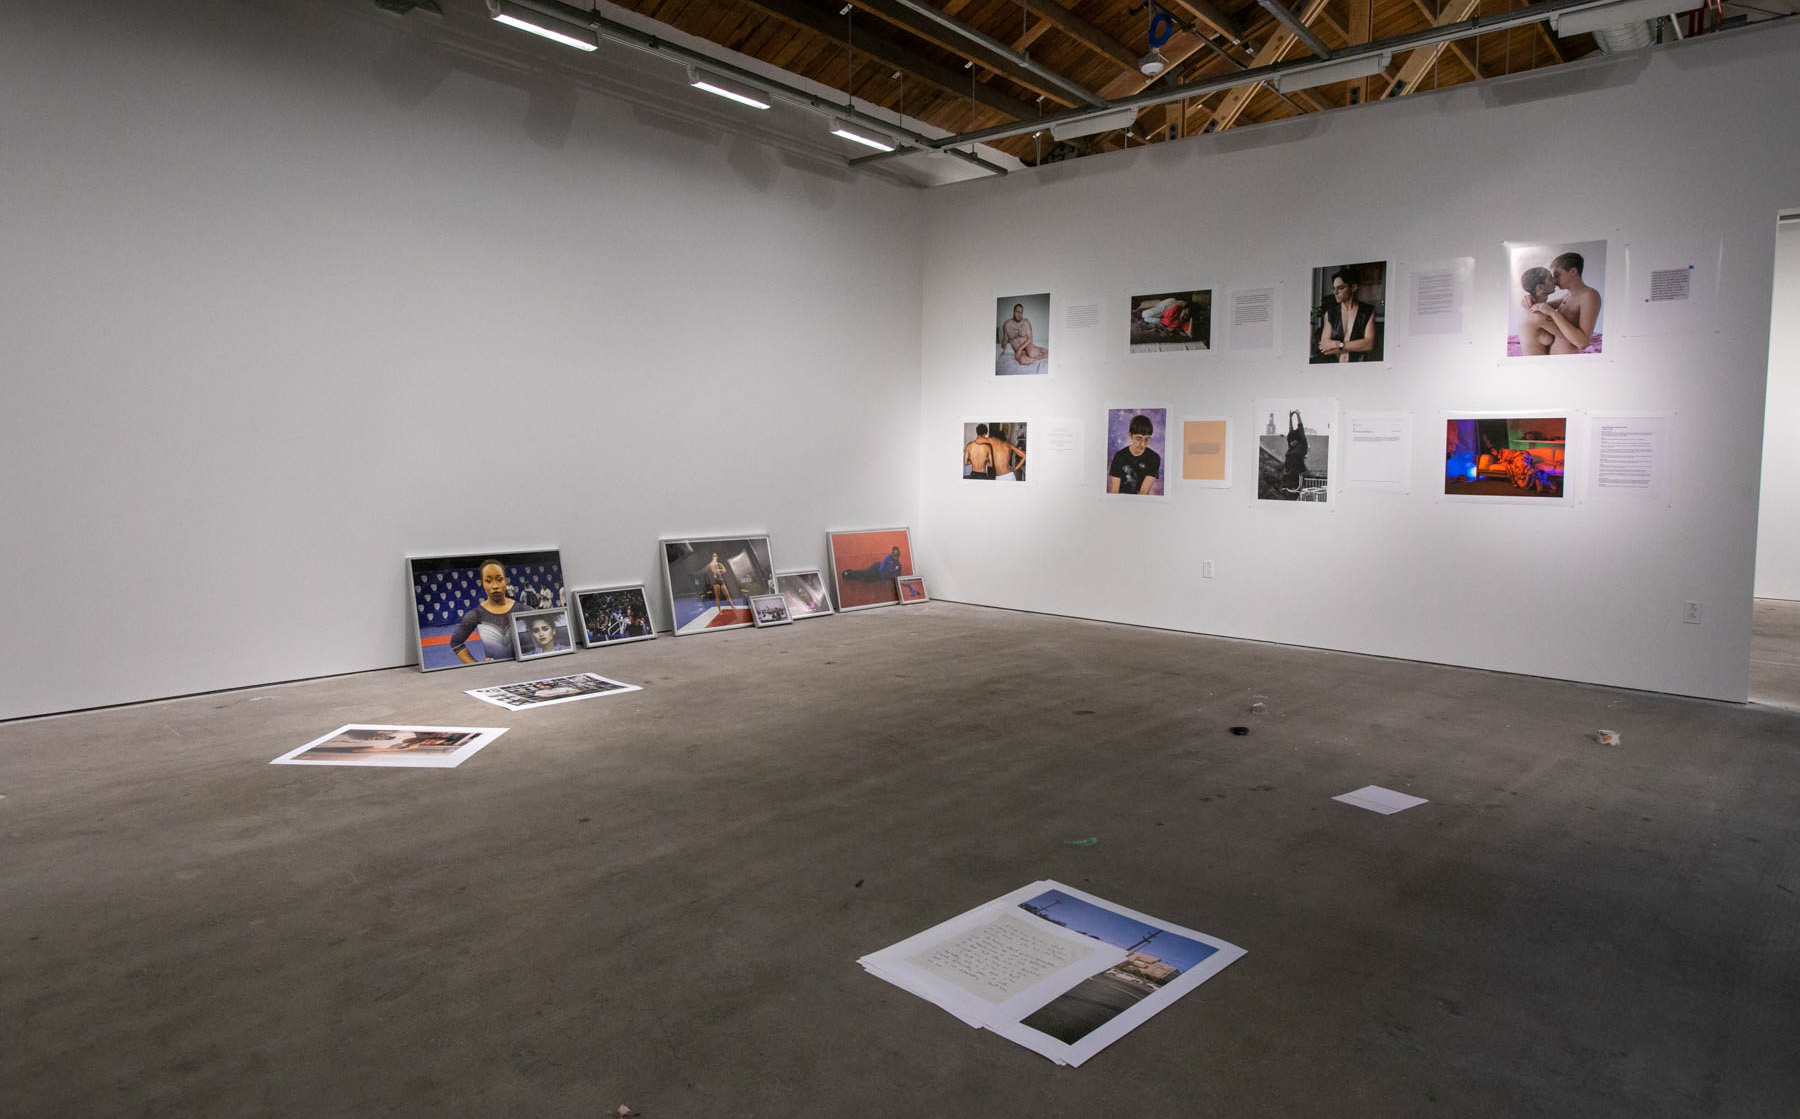 Photographs installed on the floor and walls of a graduate studio